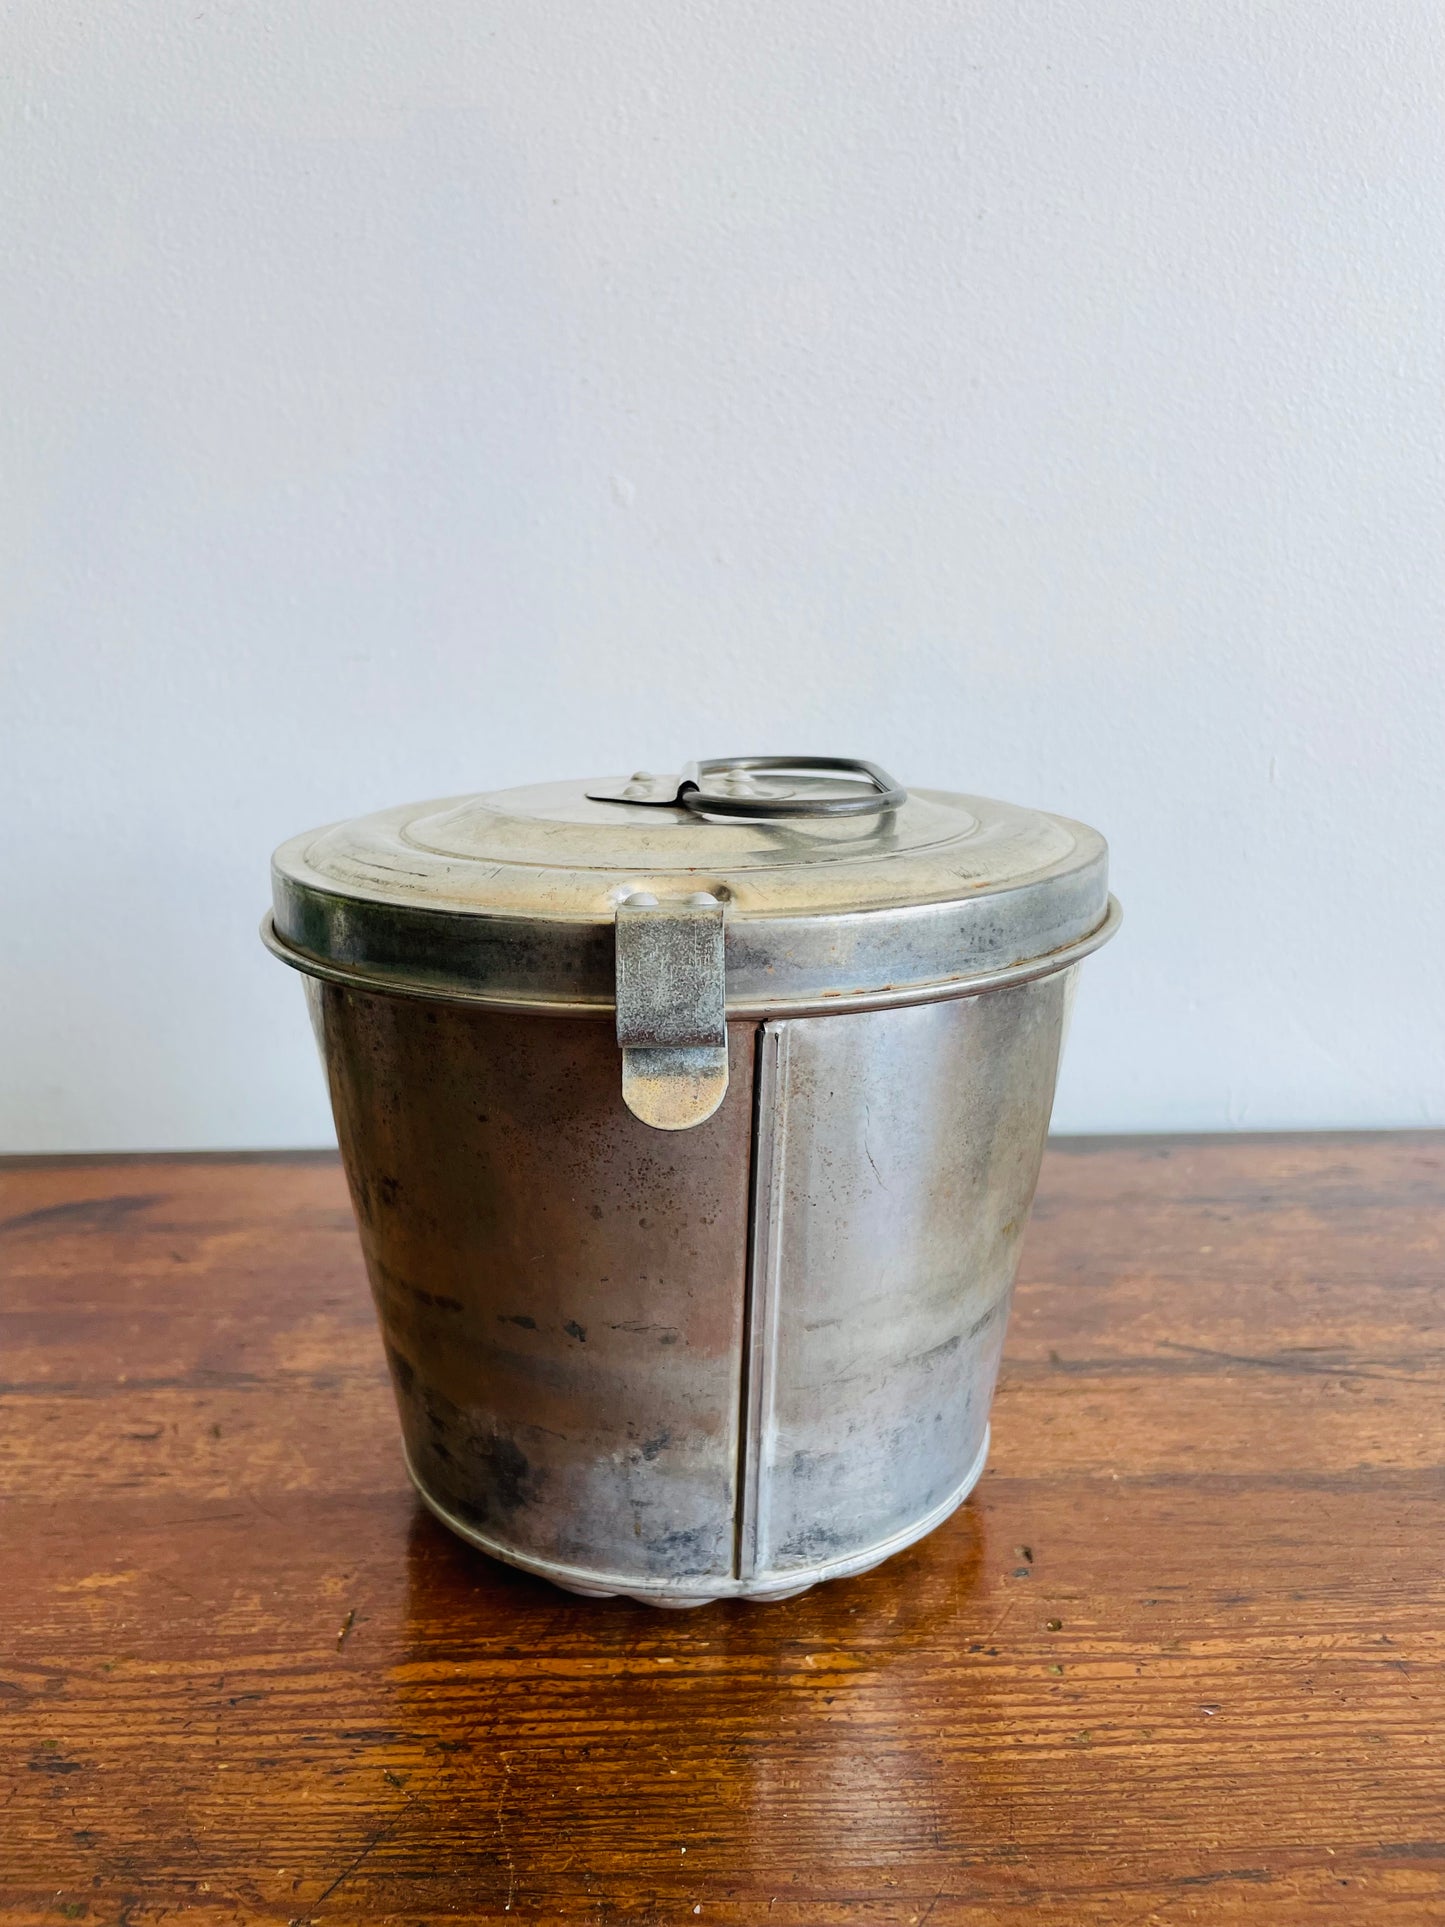 Aluminium Steamed Pudding Mold with Handle & Lid - Made in West Germany - Also Makes a Great Container or Kitchen Compost Holder!